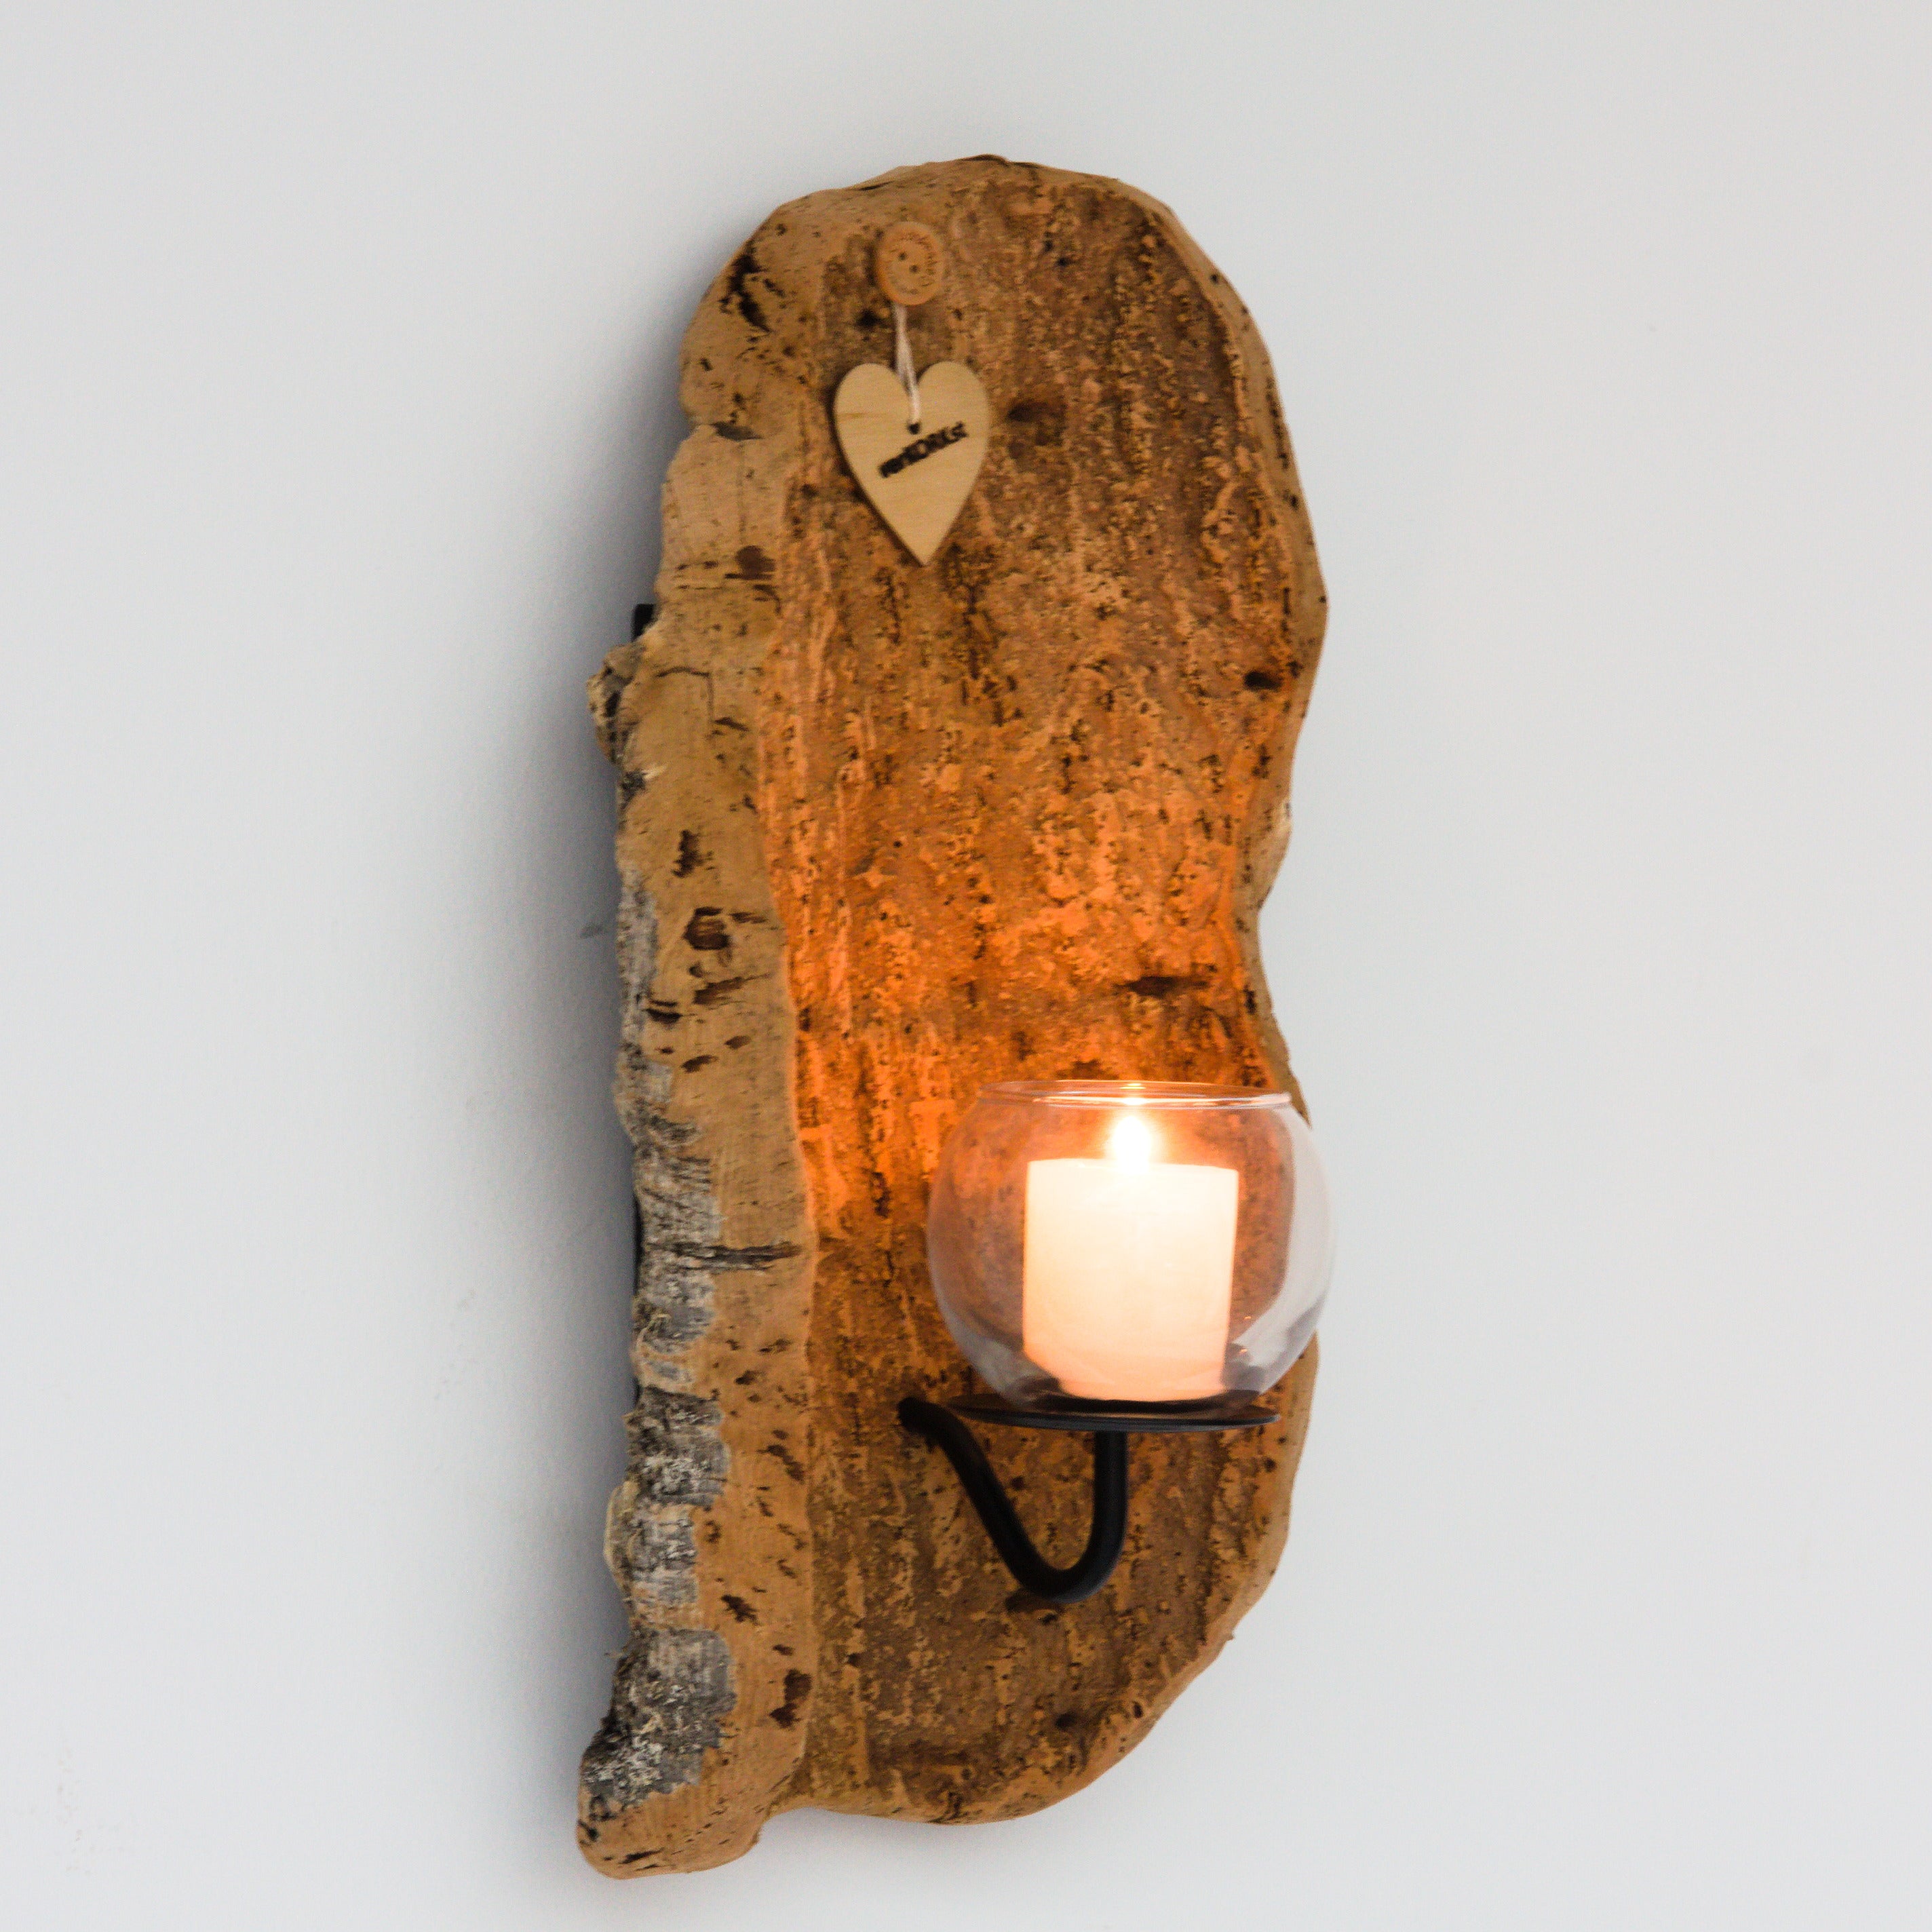 verKORKst premium wall candle holder made of cork bark for indoor and outdoor use * rustic wall decoration * exclusive vintage wall candle holder